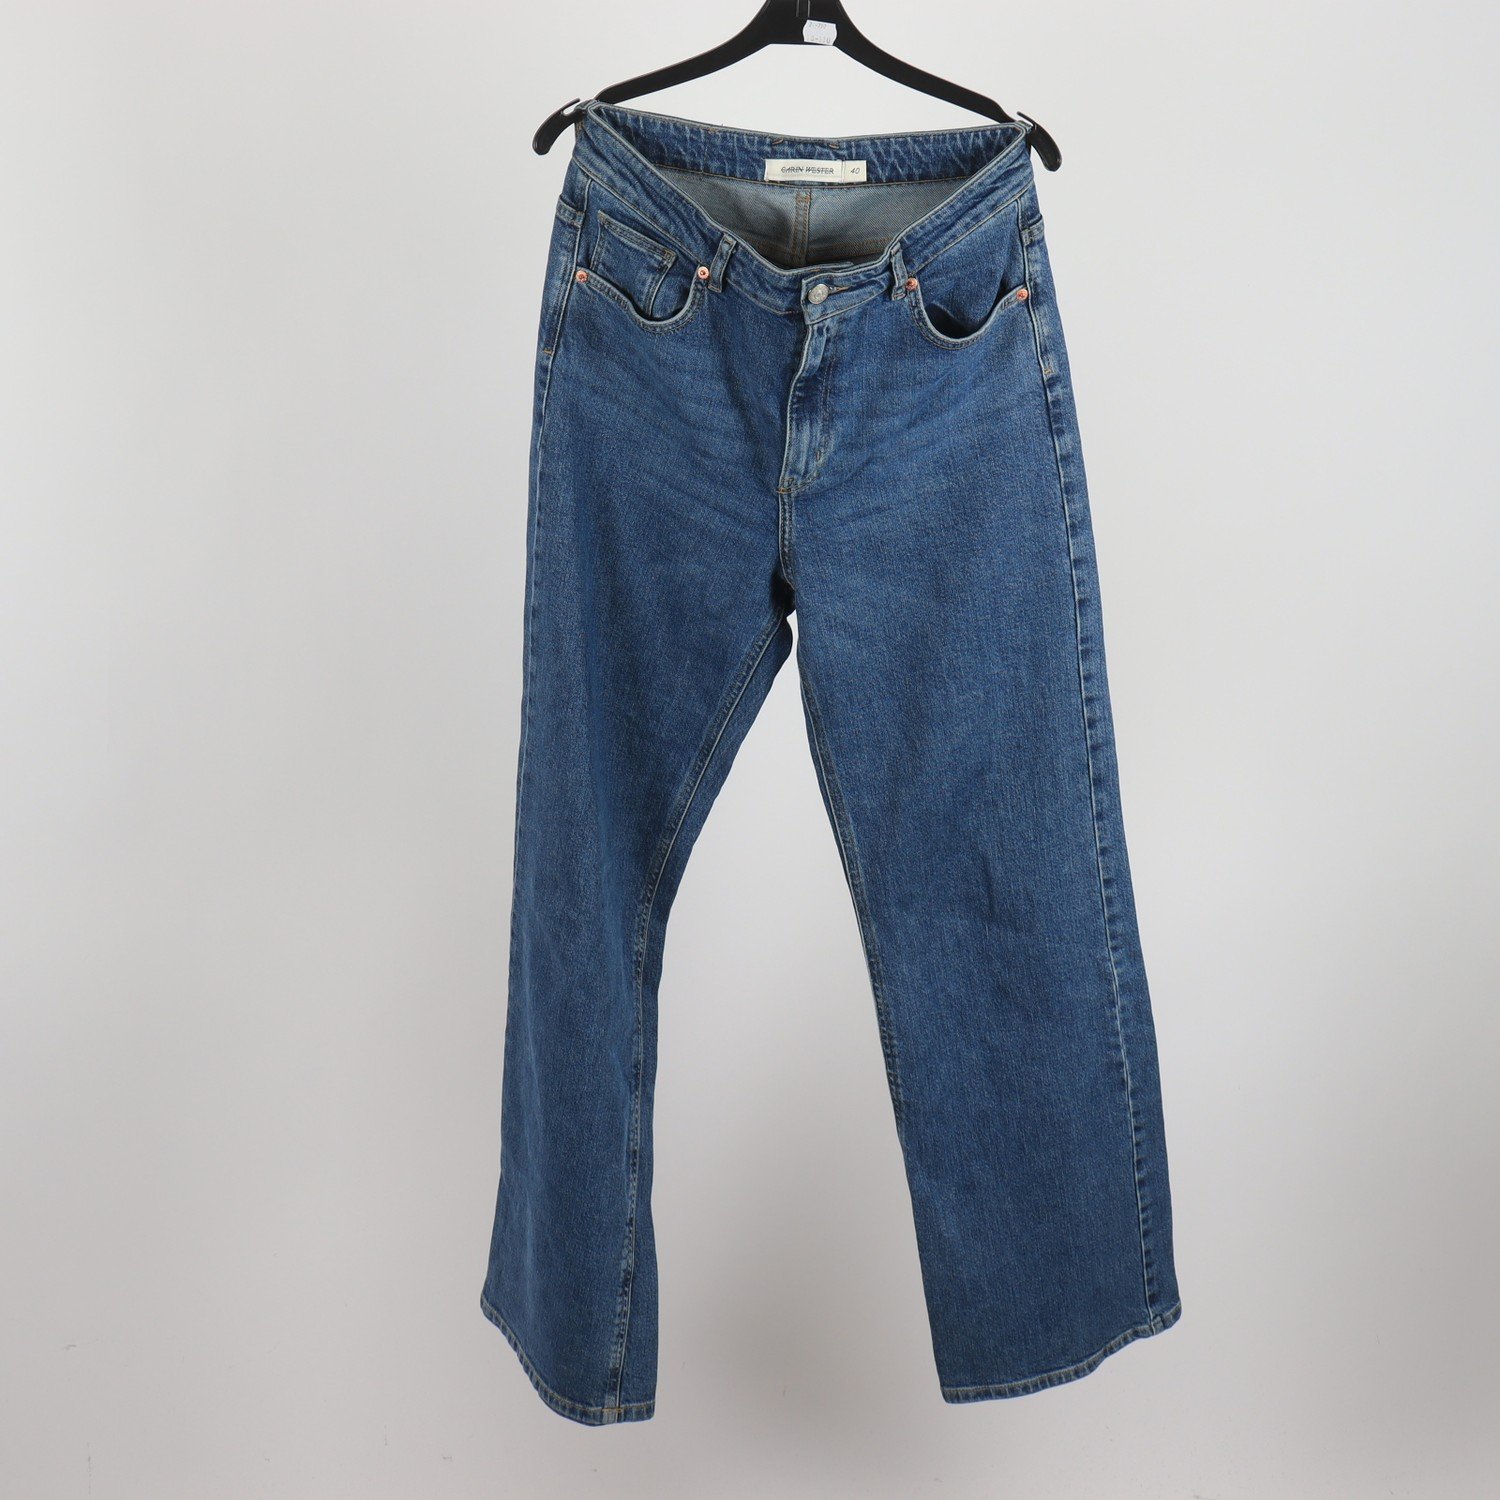 Jeans, Carin Wester, stl. 40